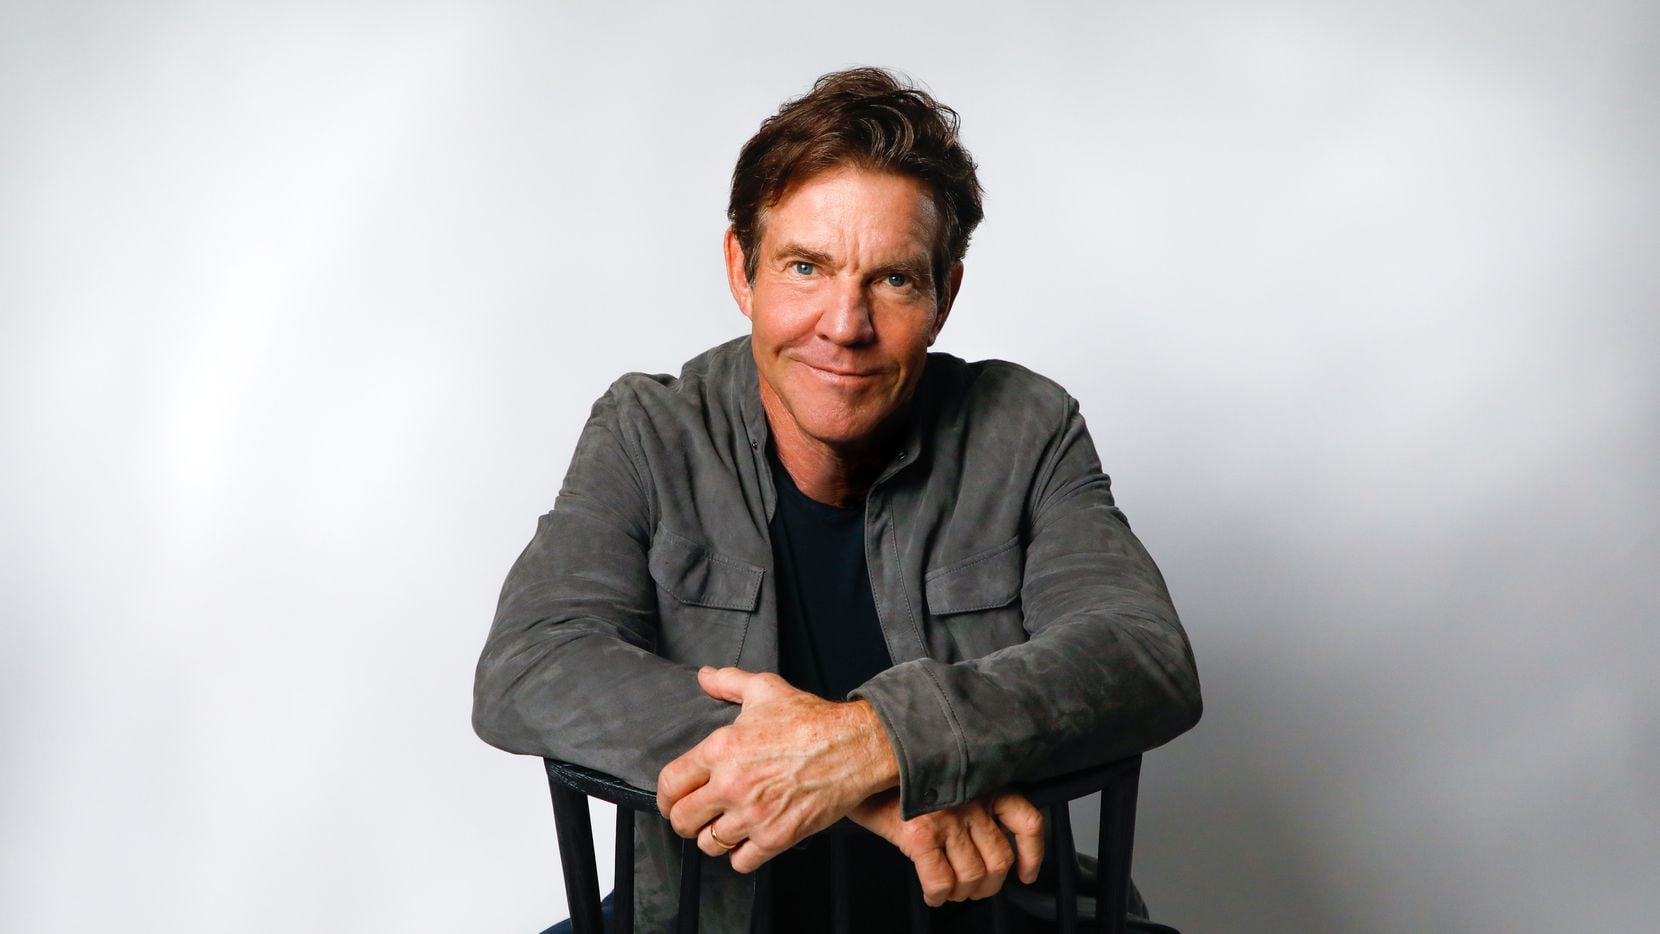 Dennis Quaid will star in Taylor Sheridan's '1883: The Bass Reeves Story'